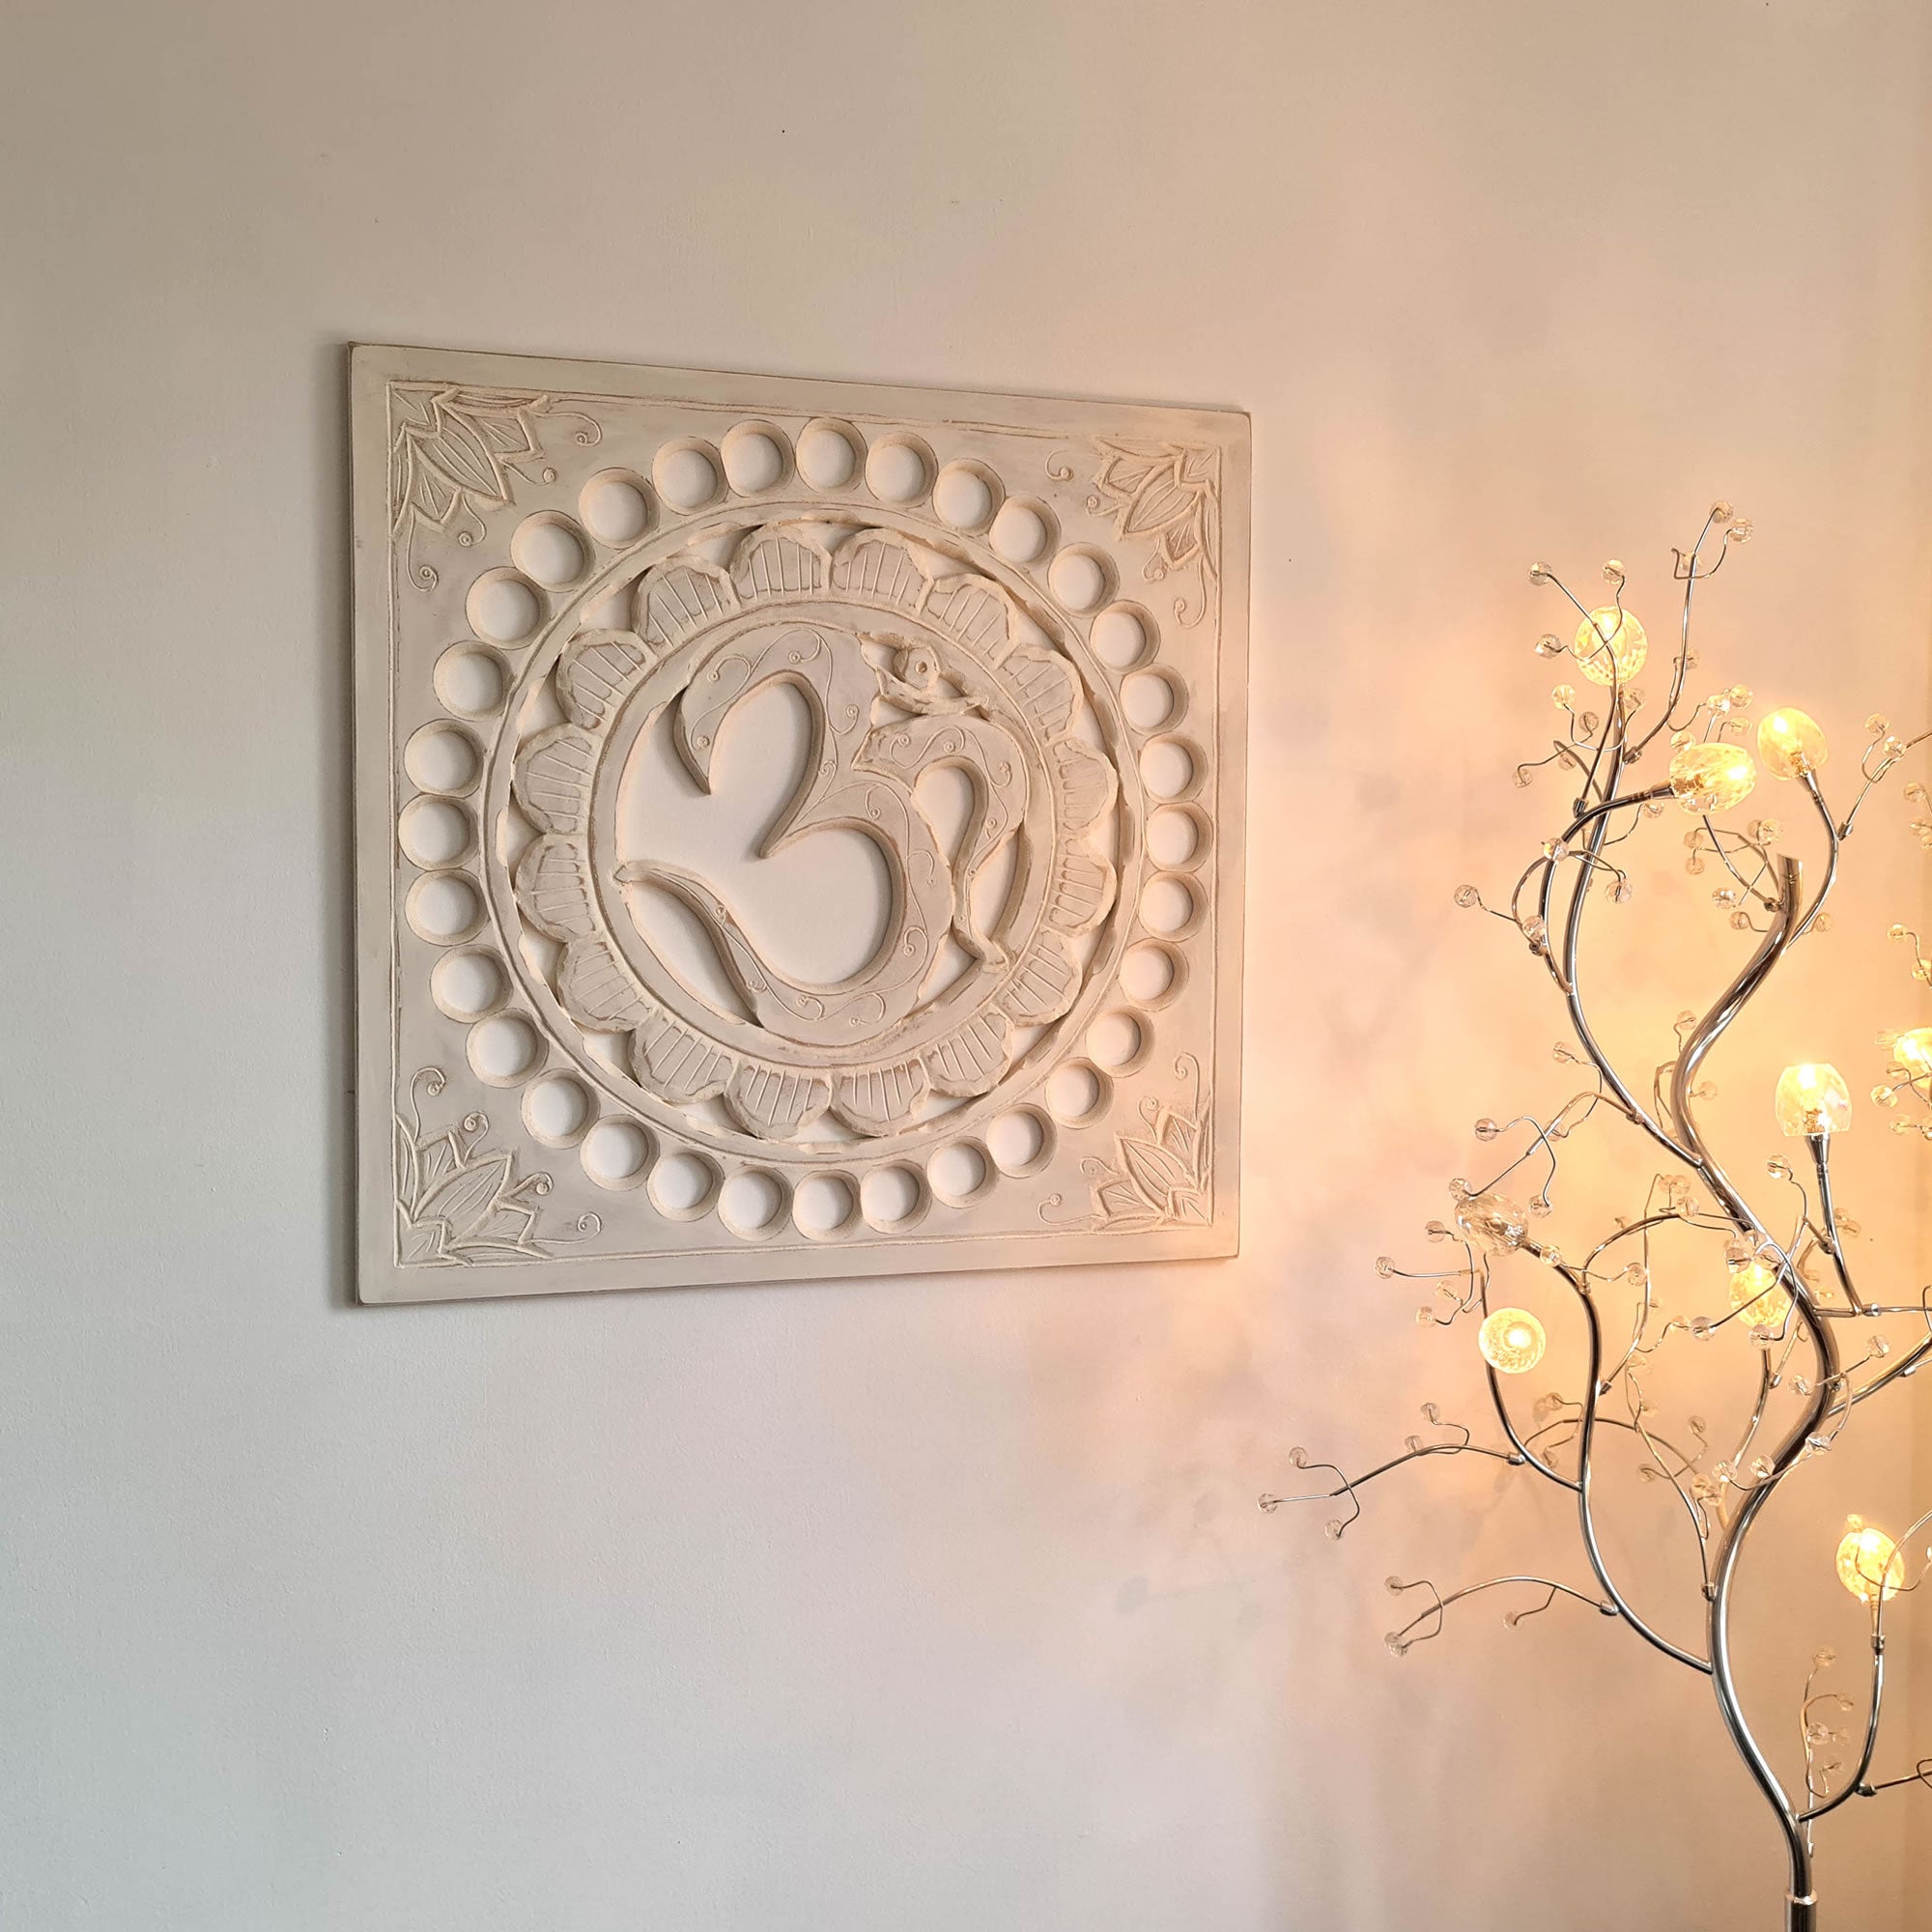 Handmade Carved Wooden Decorative Wall Art OM Mantra Distressed White